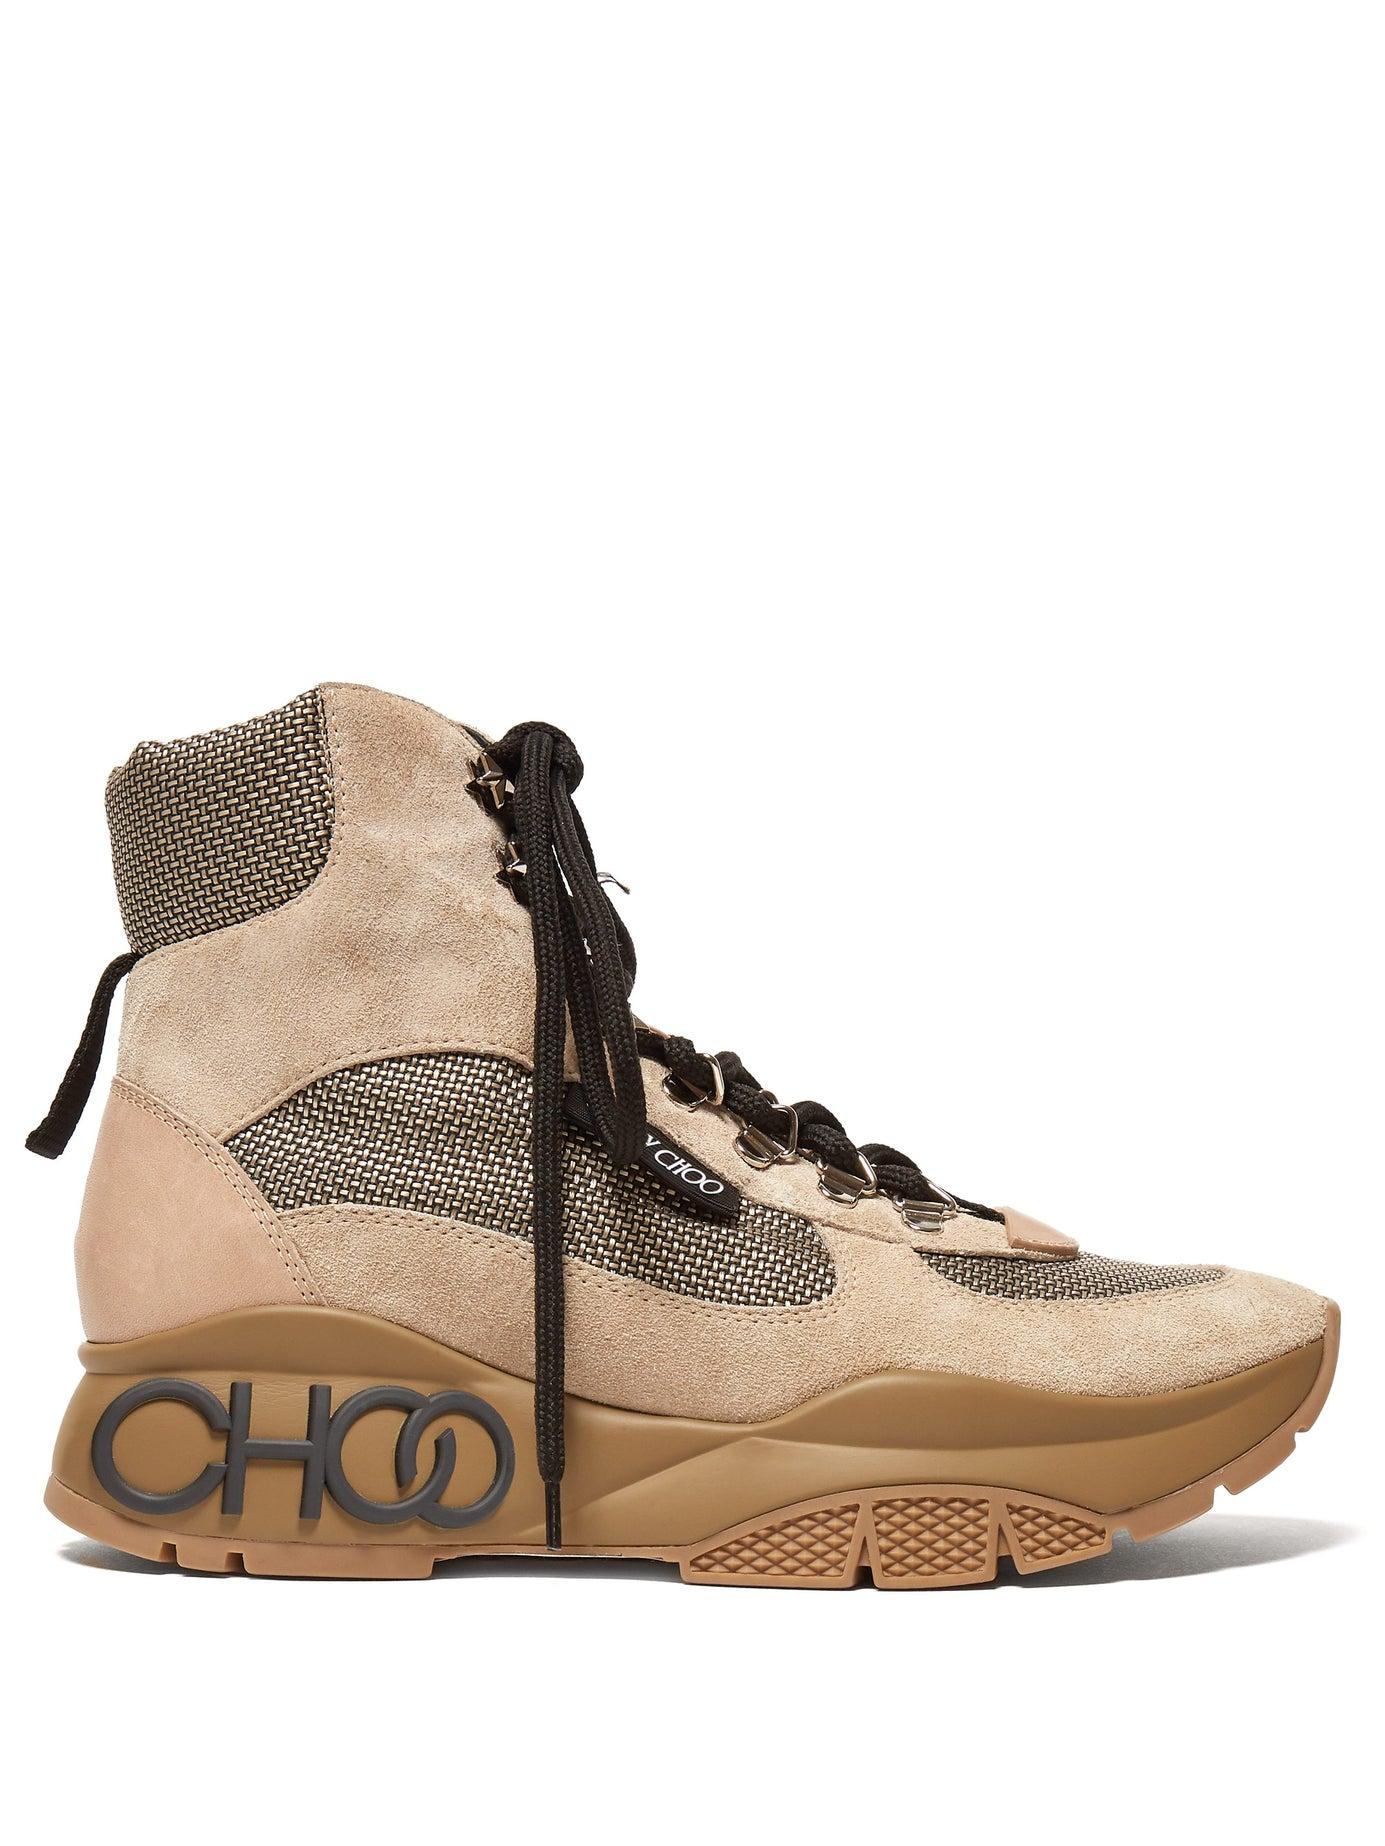 Jimmy Choo Inca Suede Hiking Boots | Lyst